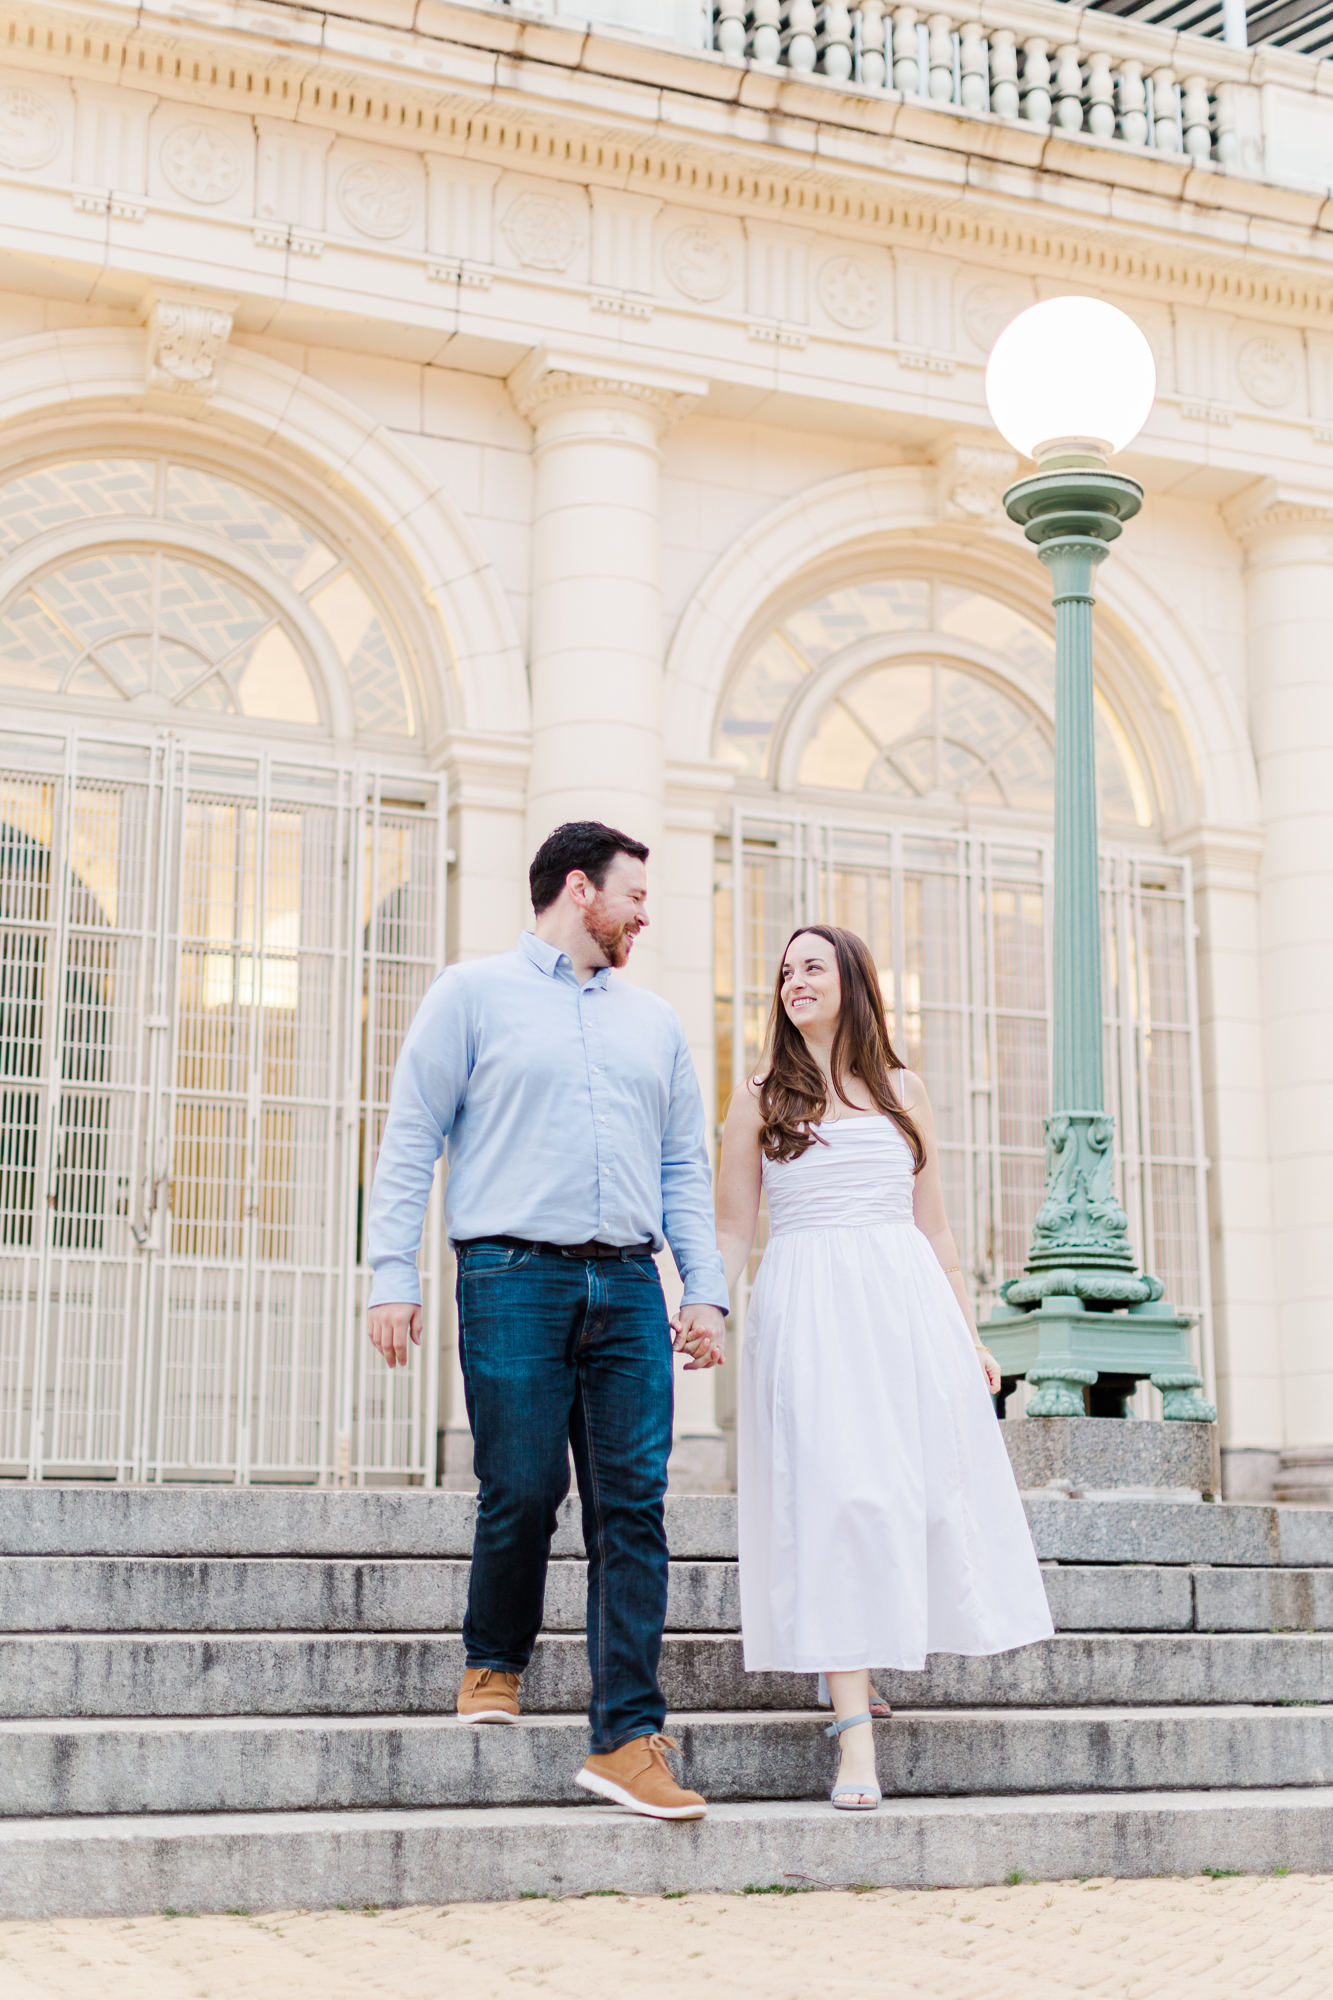 Charming Boathouse Engagement Photos In Prospect Park